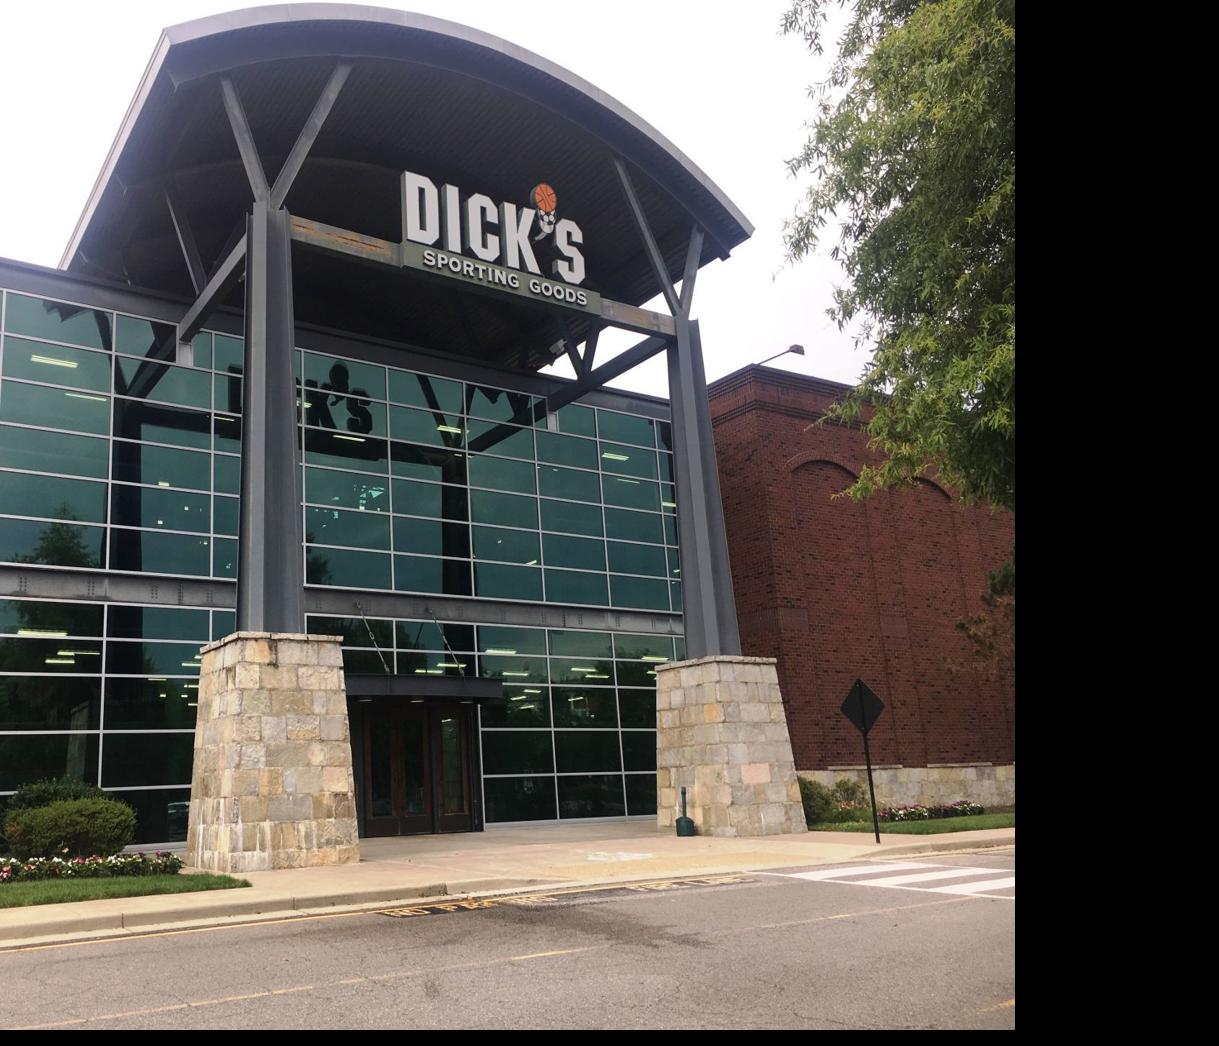 Dick's Sporting Goods' new store has a driving range and outdoor track